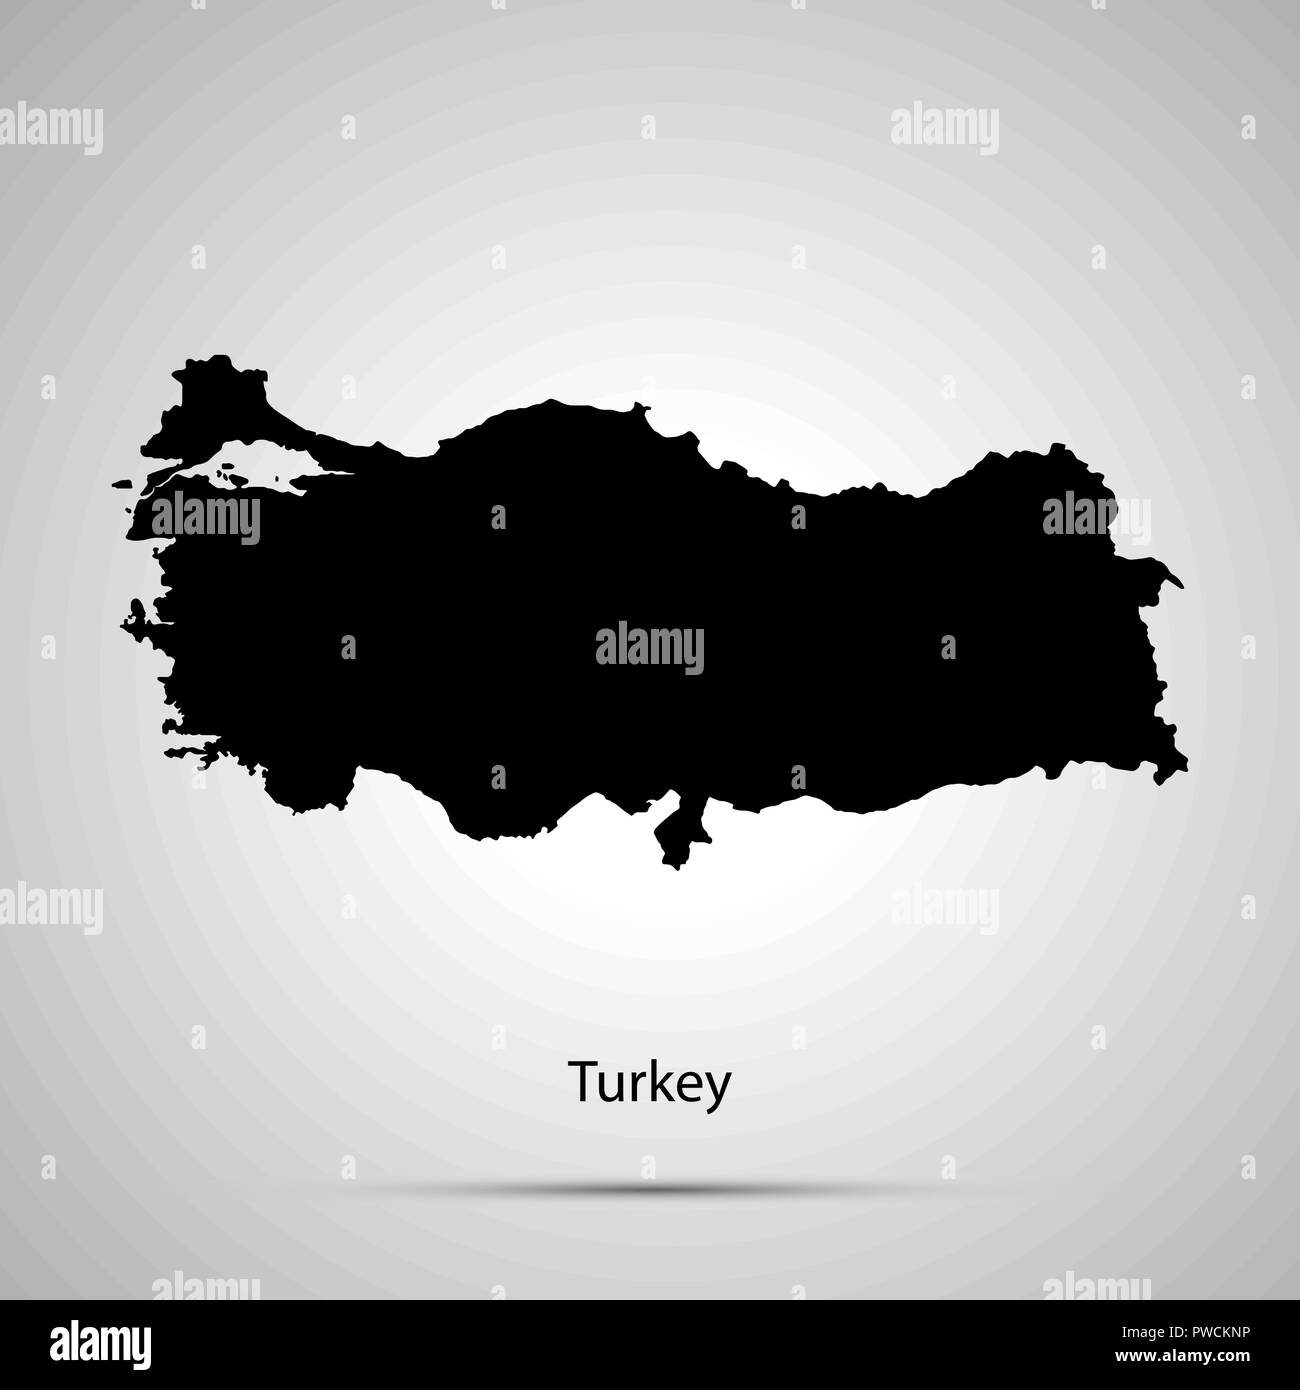 Turkey country map, simple black silhouette Stock Vector